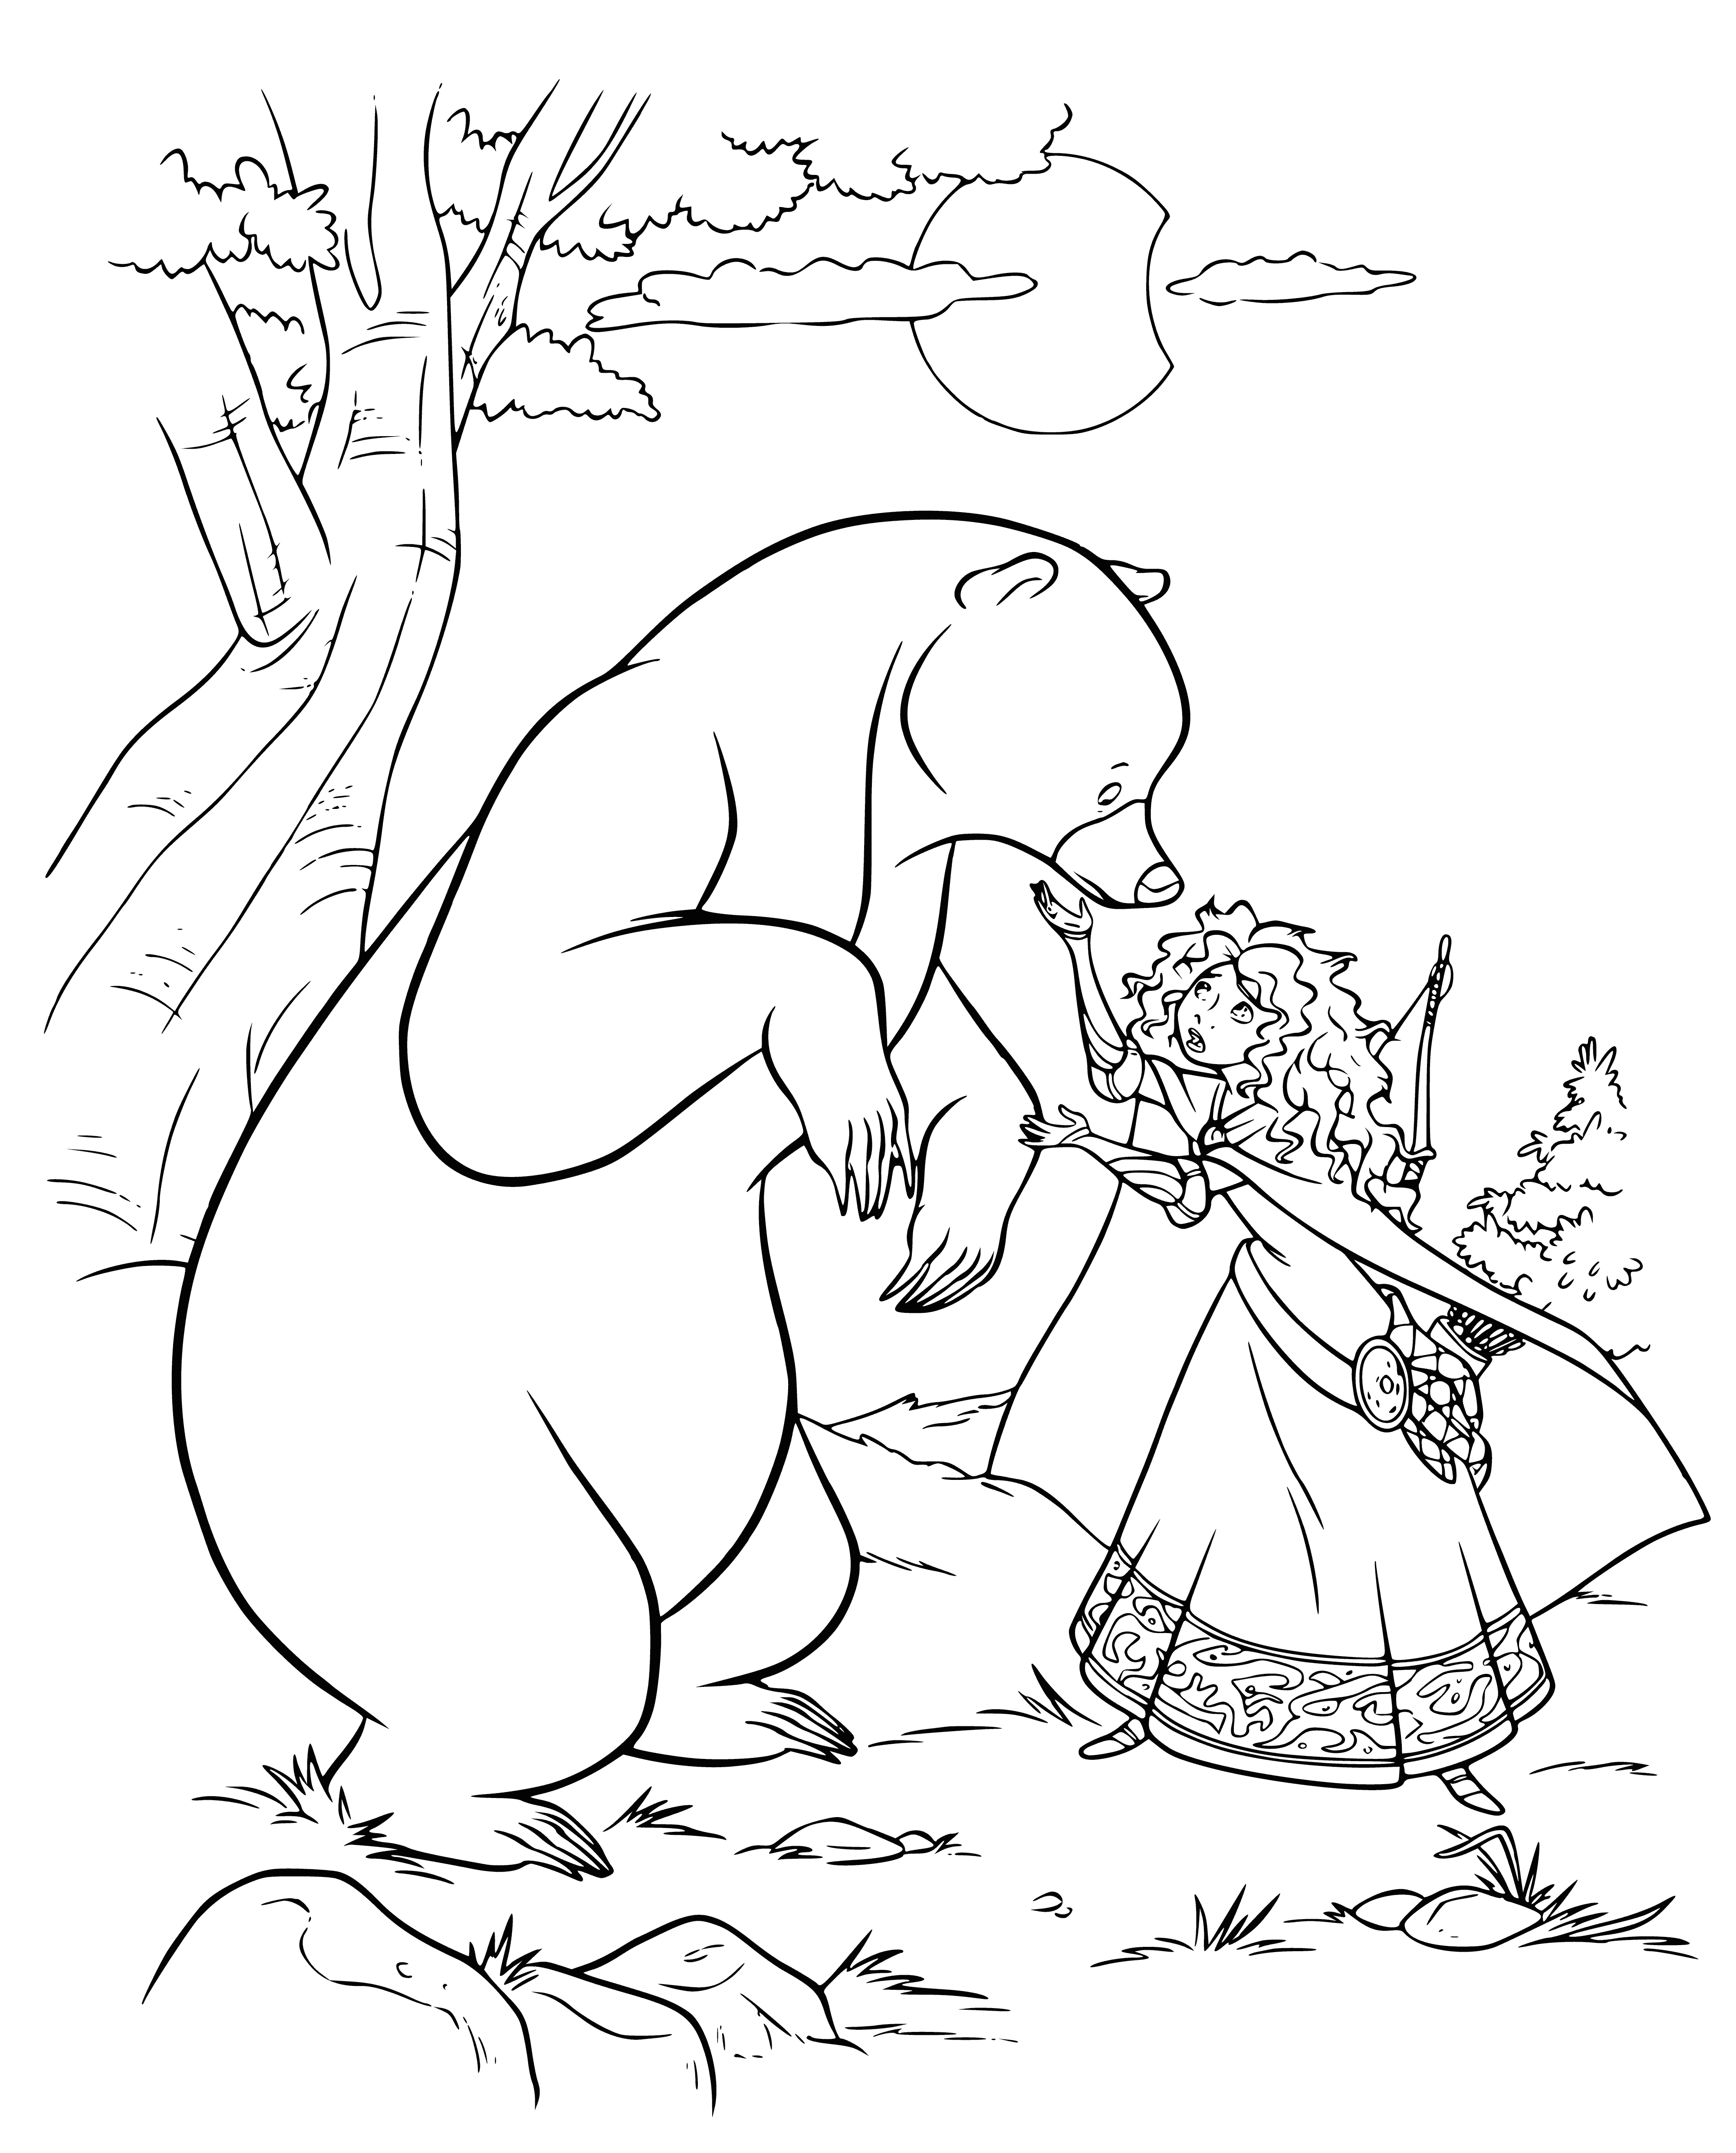 Merida sorry for the bear queen coloring page